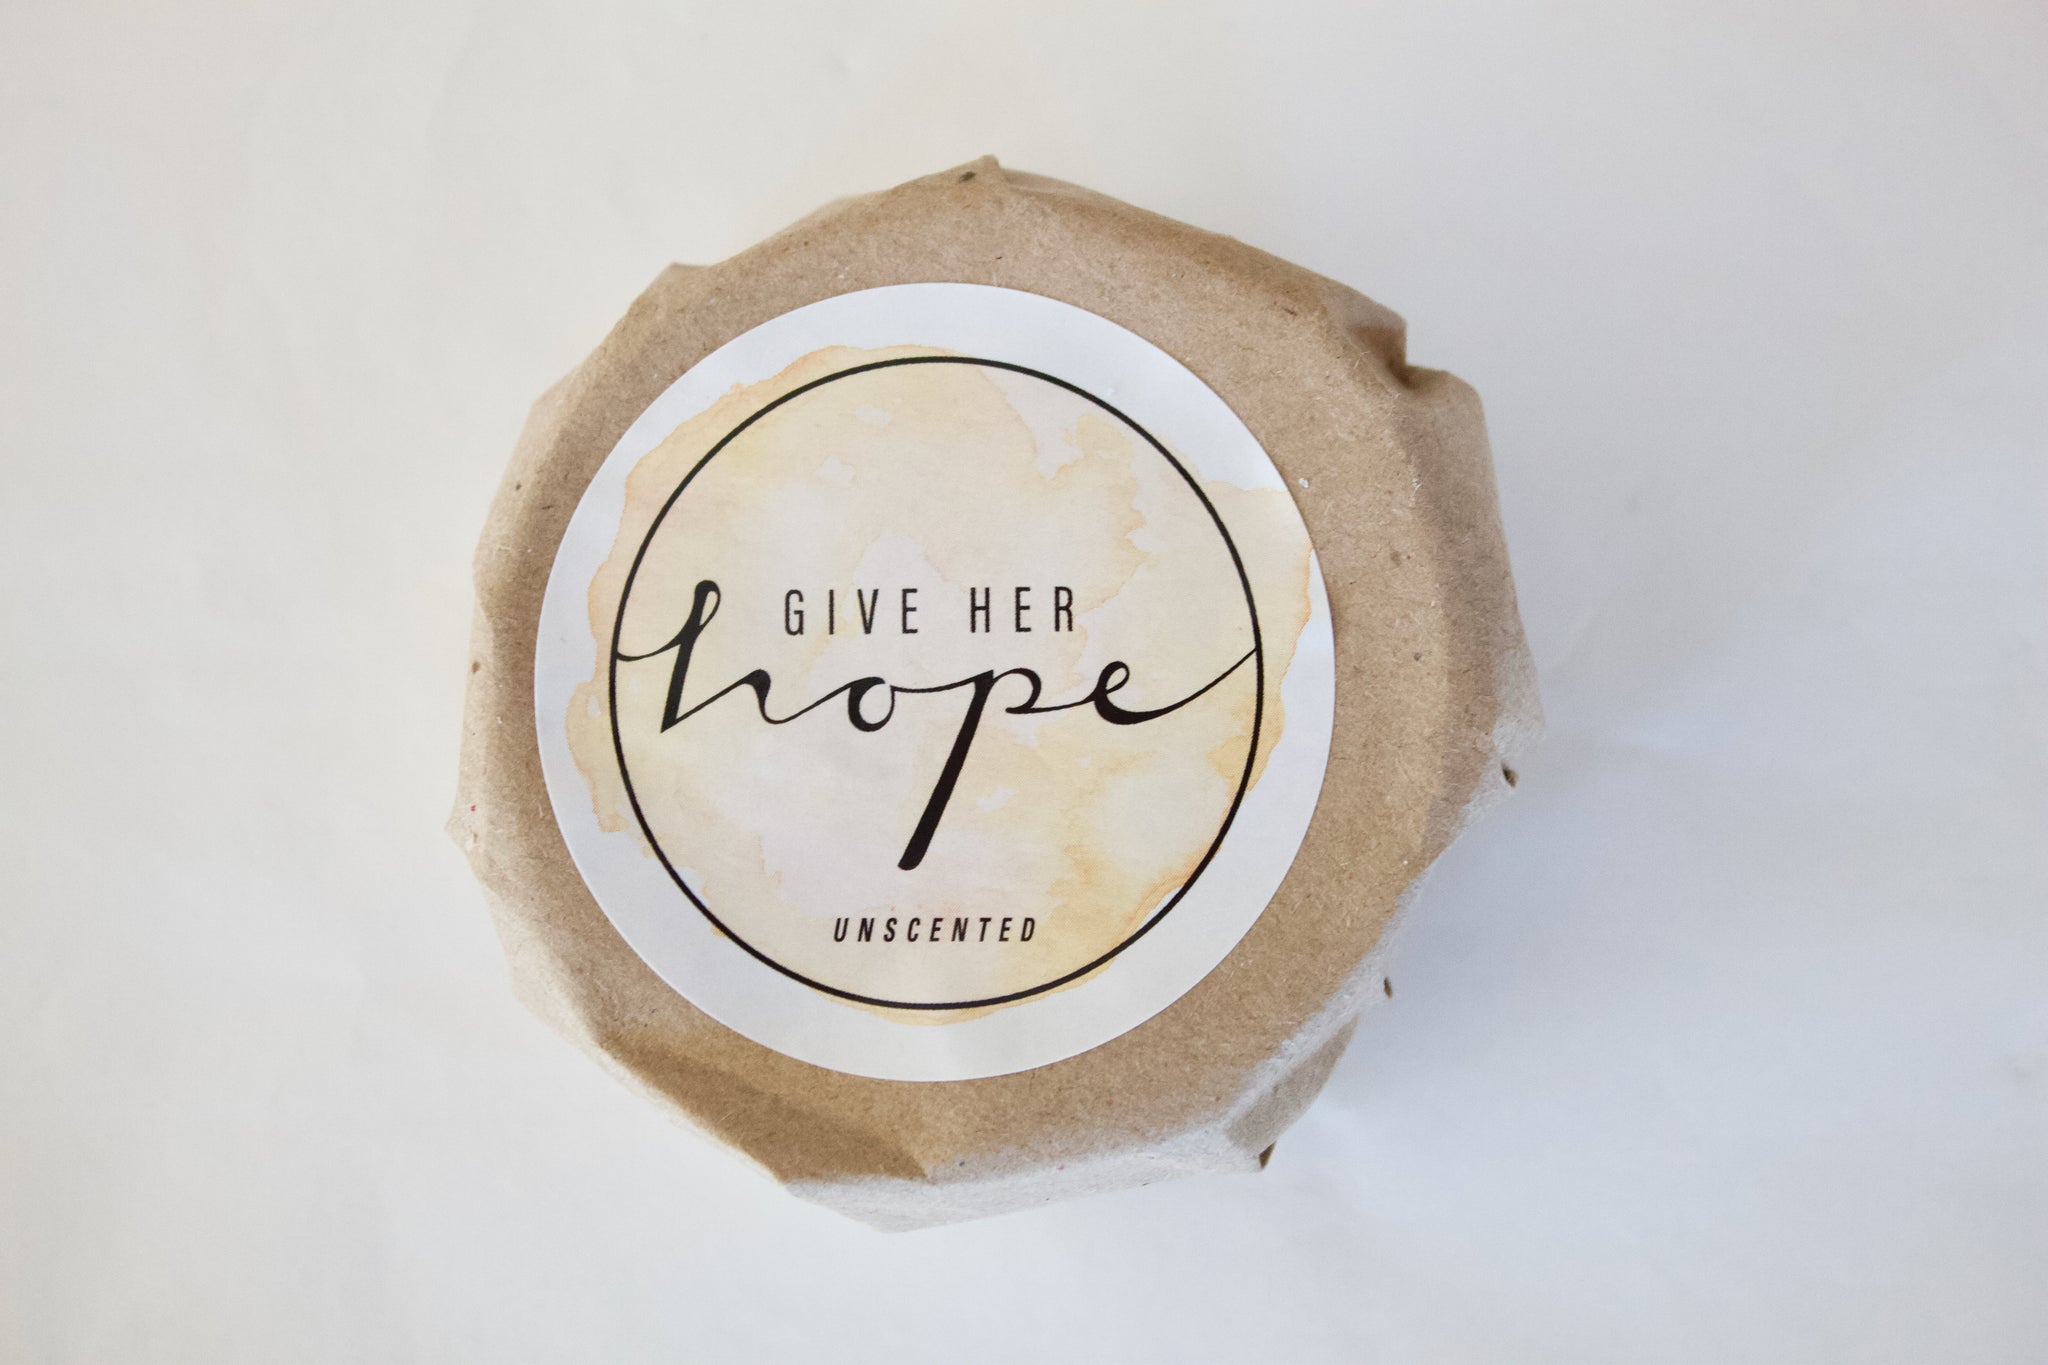 Give her Hope - Round Soap - Unscented 100g